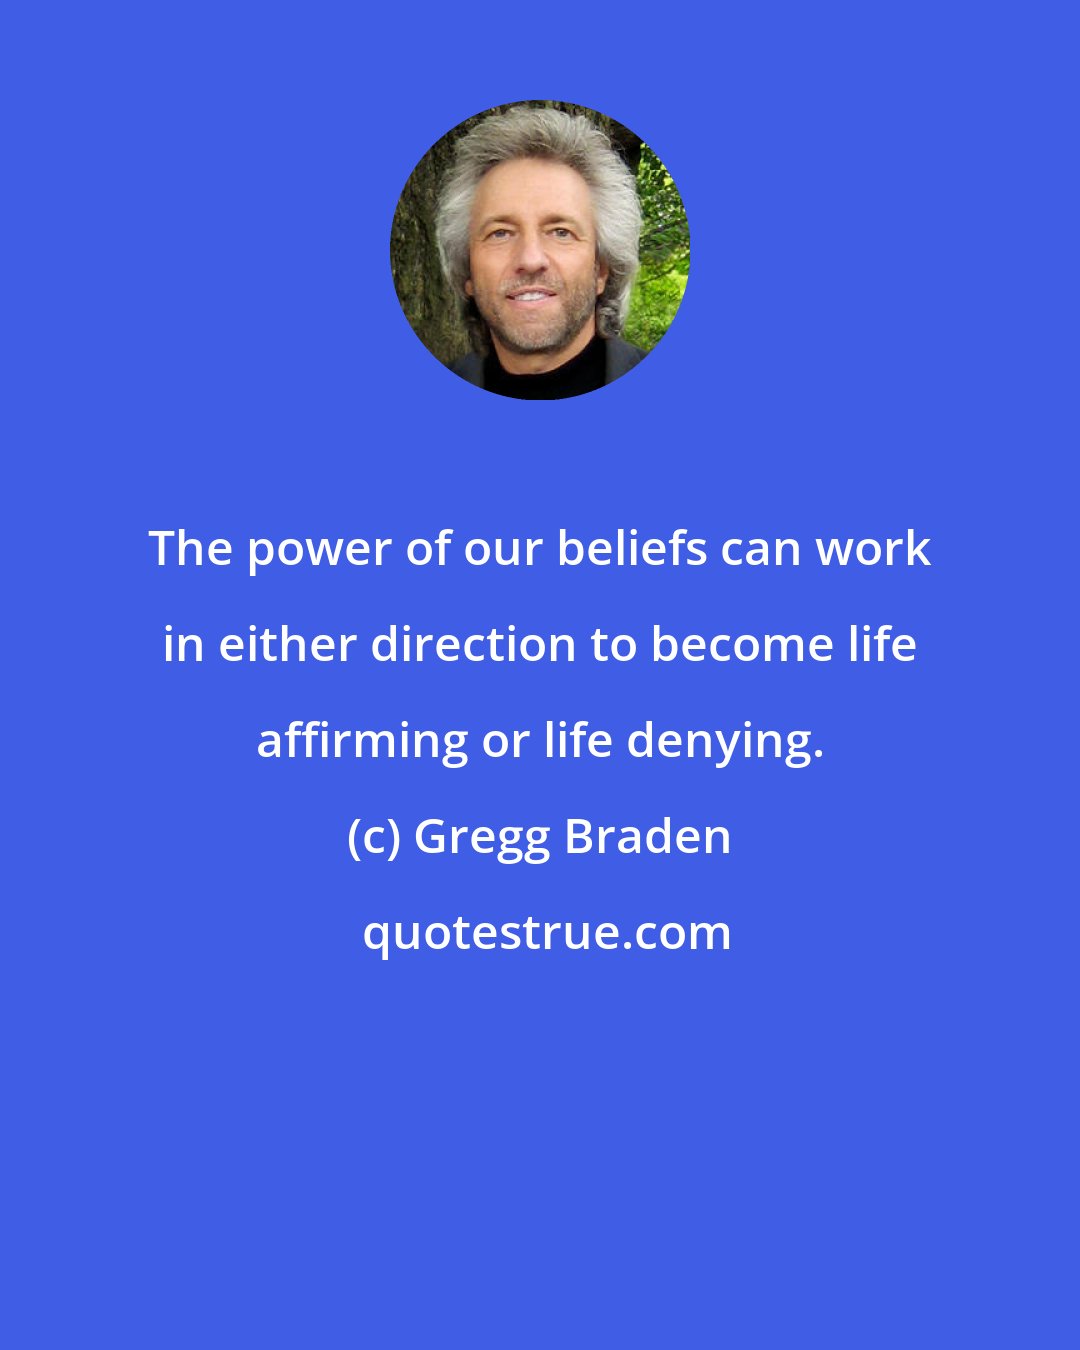 Gregg Braden: The power of our beliefs can work in either direction to become life affirming or life denying.